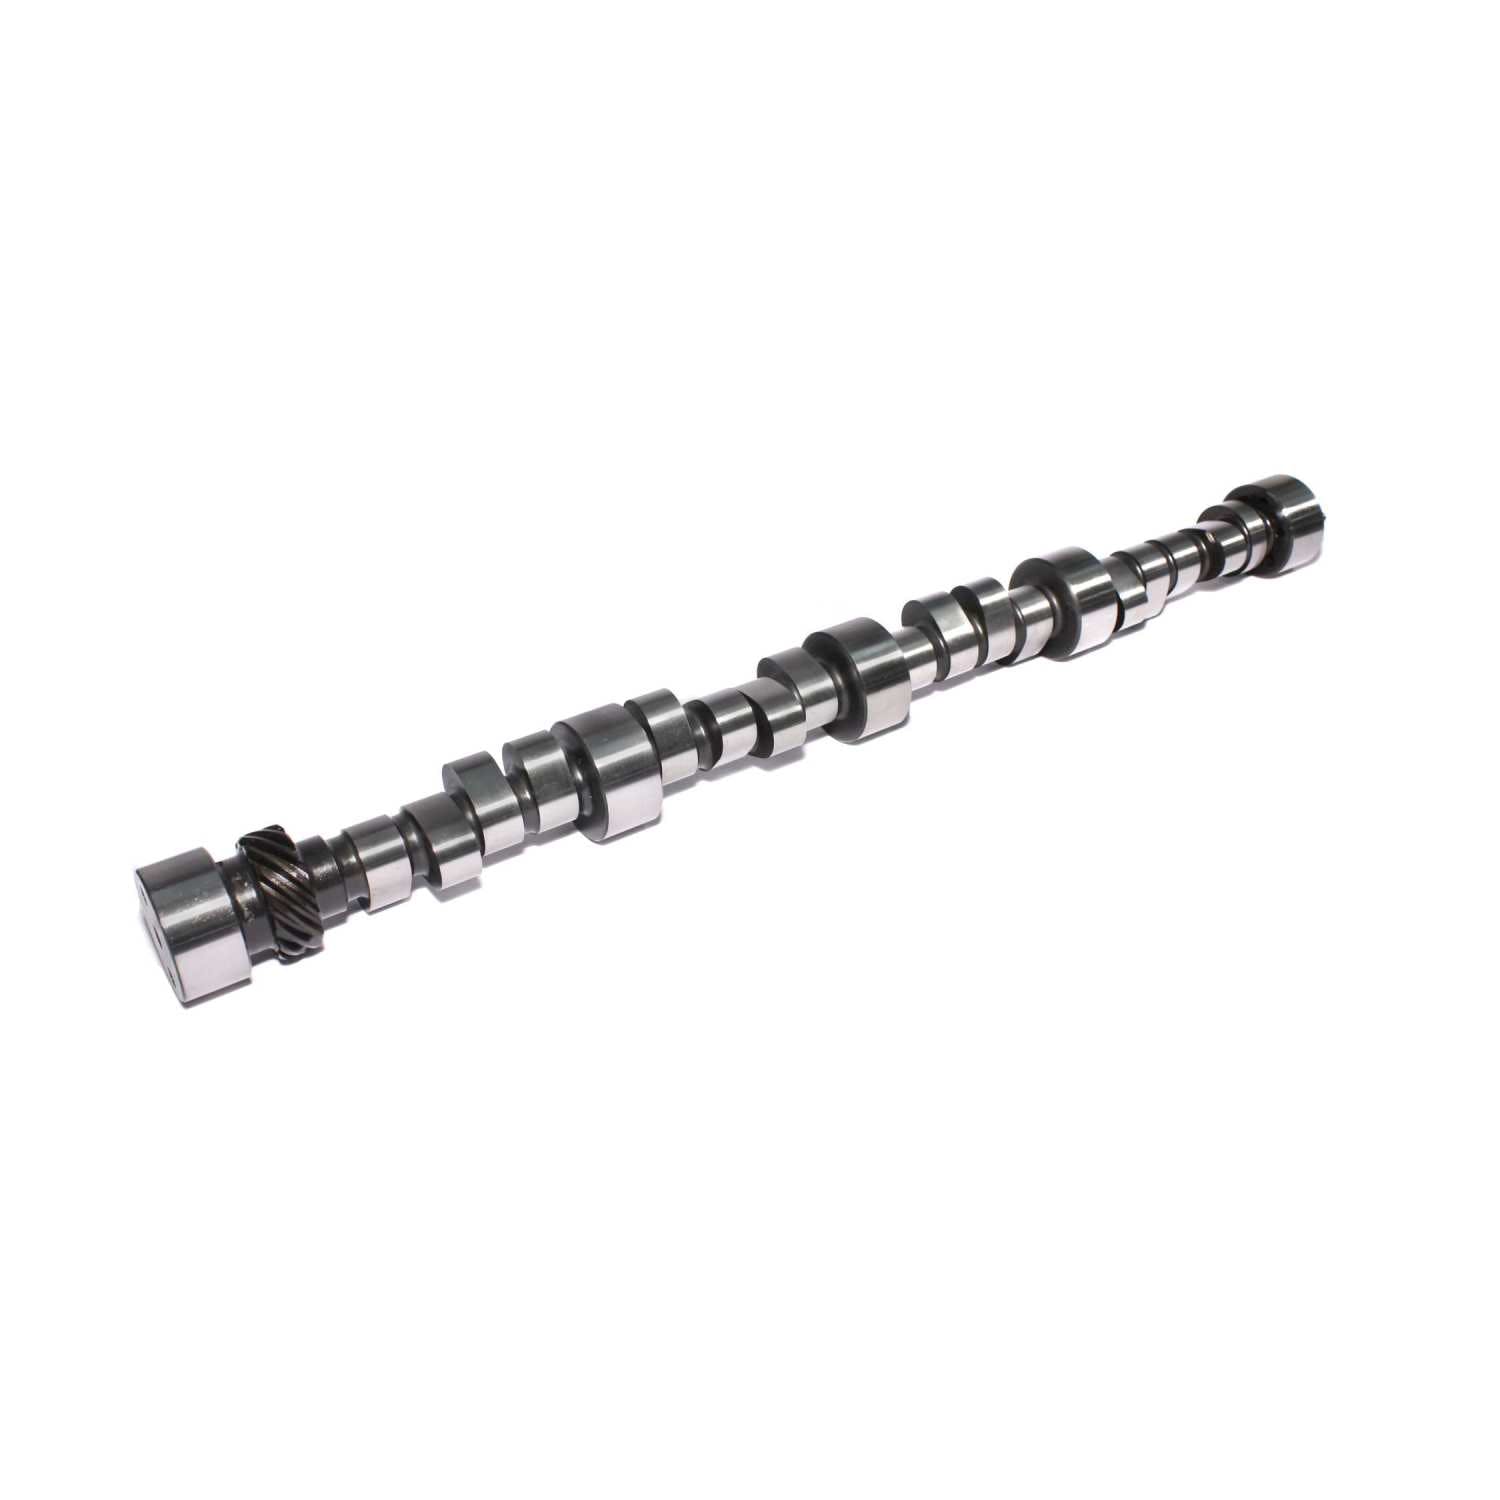 Competition Cams 11-734-9 Drag Race Camshaft